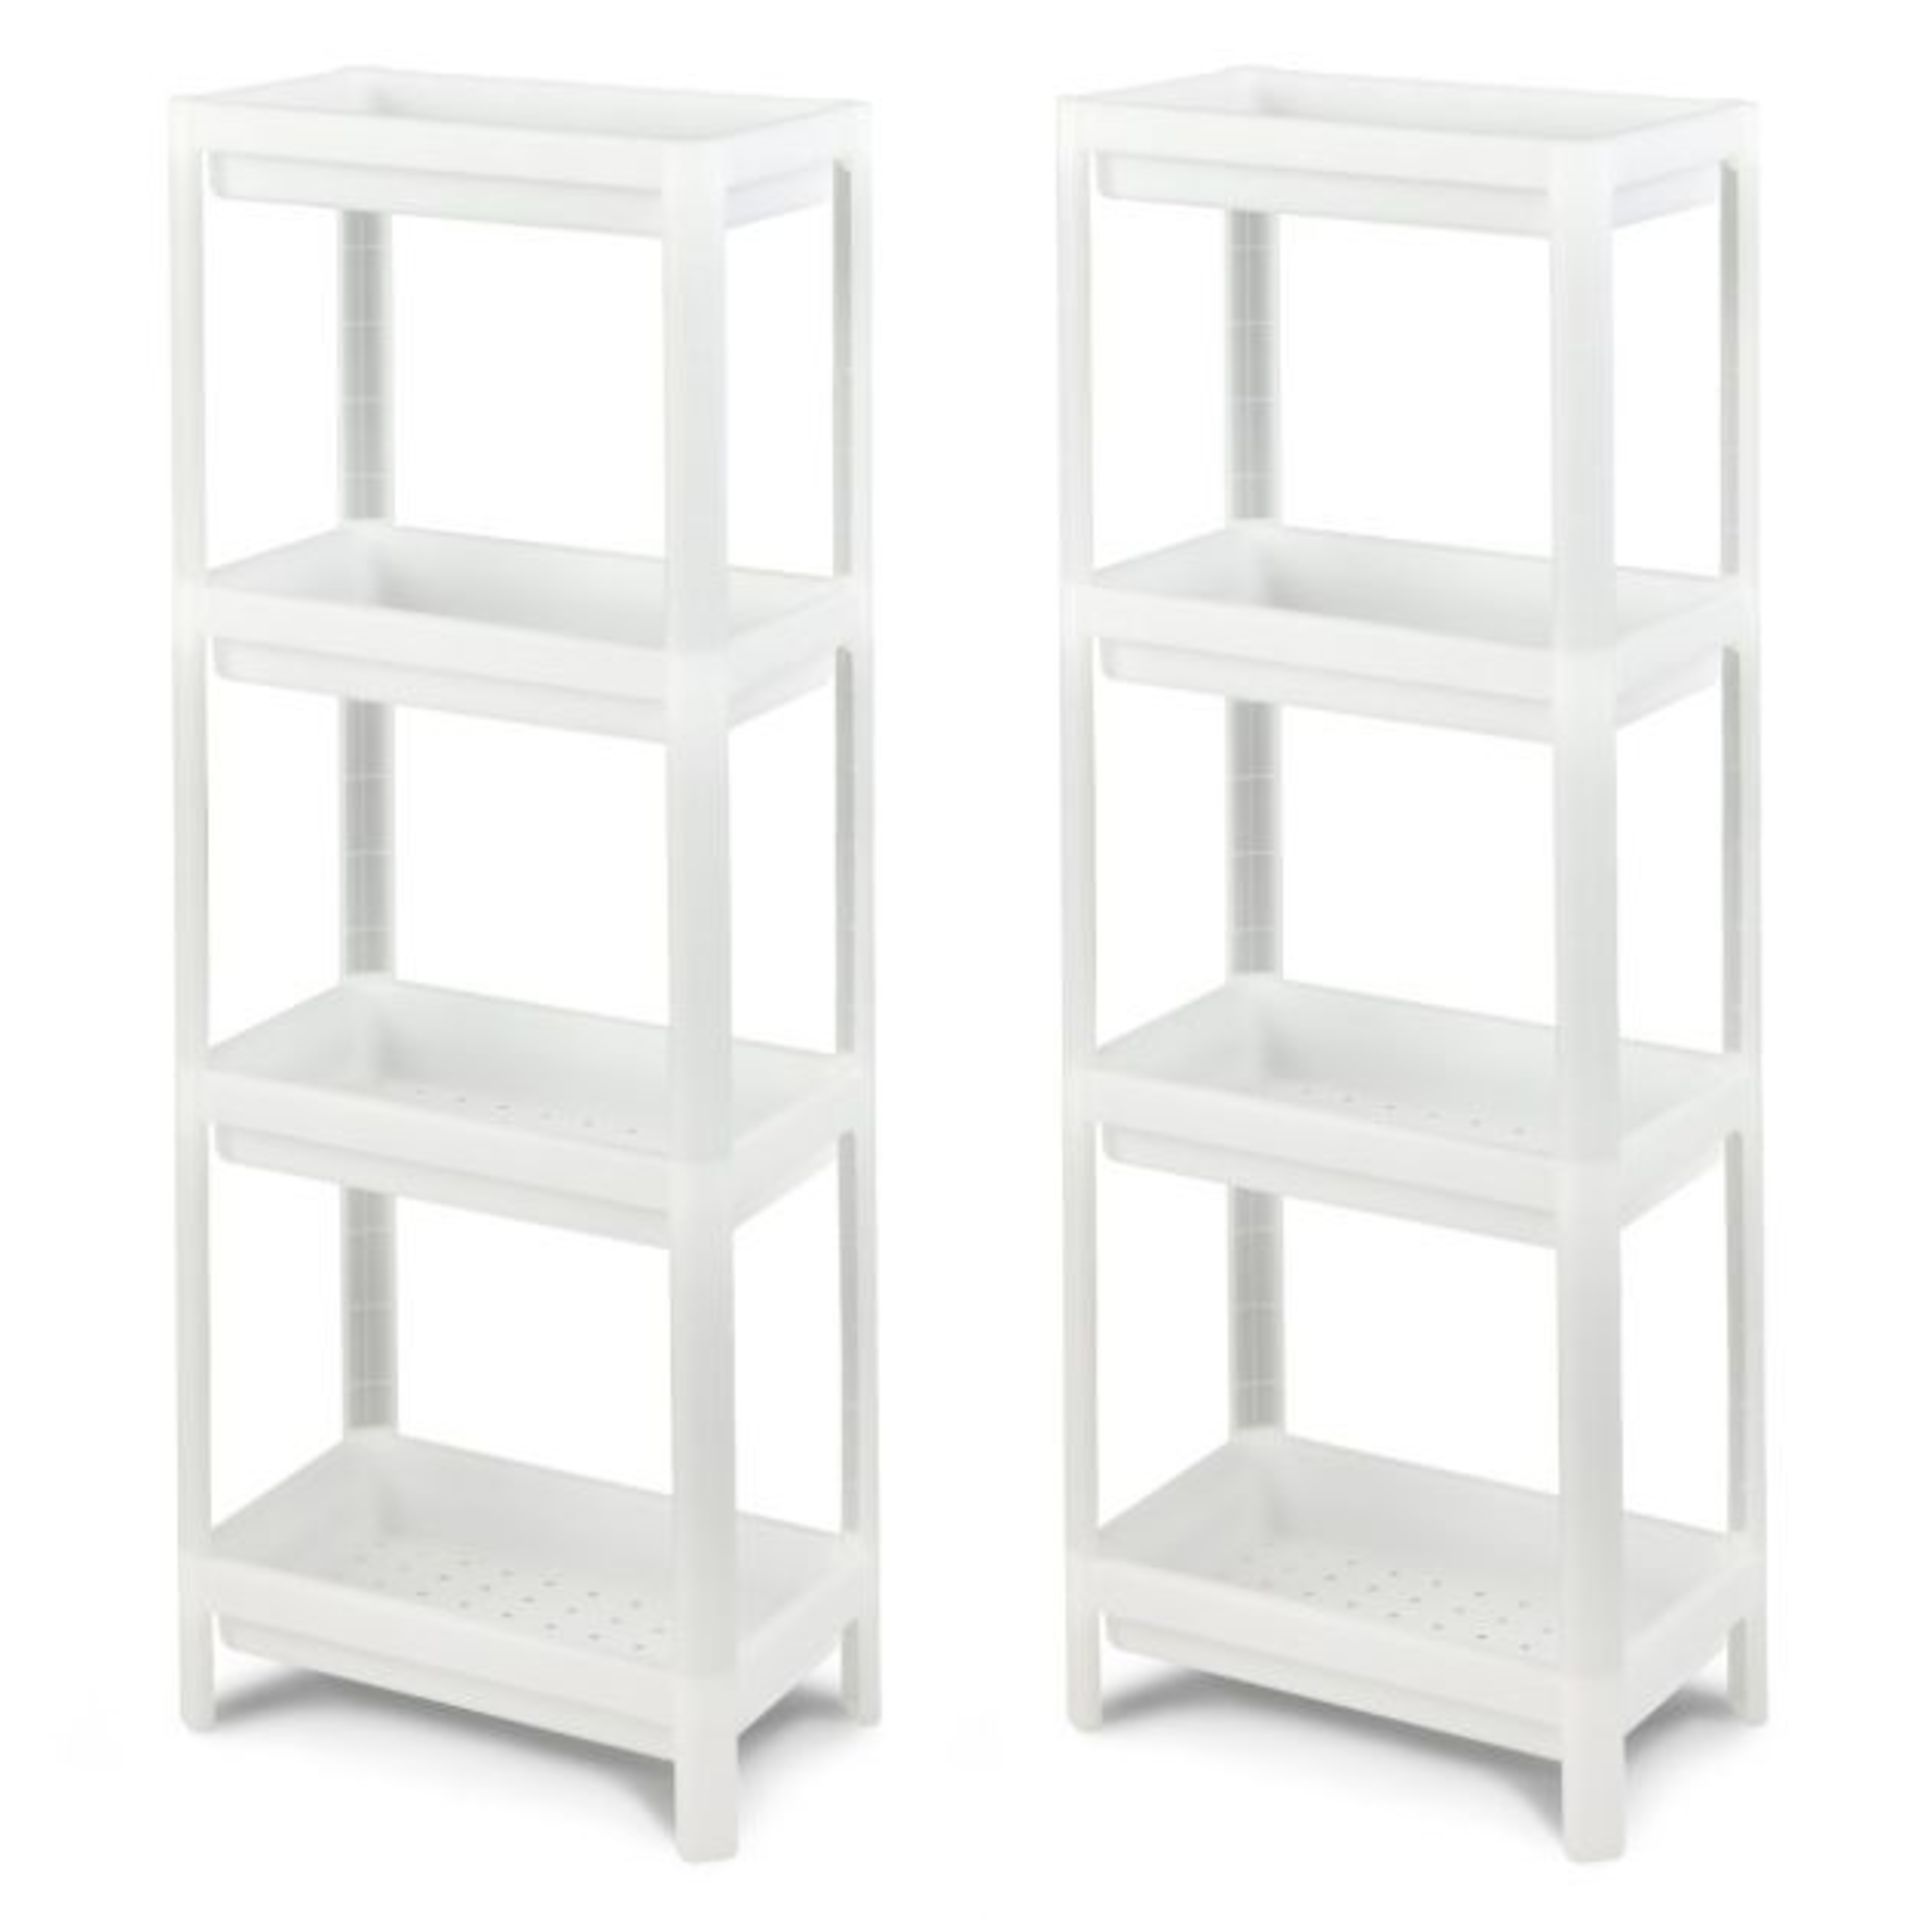 4 Tier Slim Storage Cart with Drainage Holes for Small Space - ER53